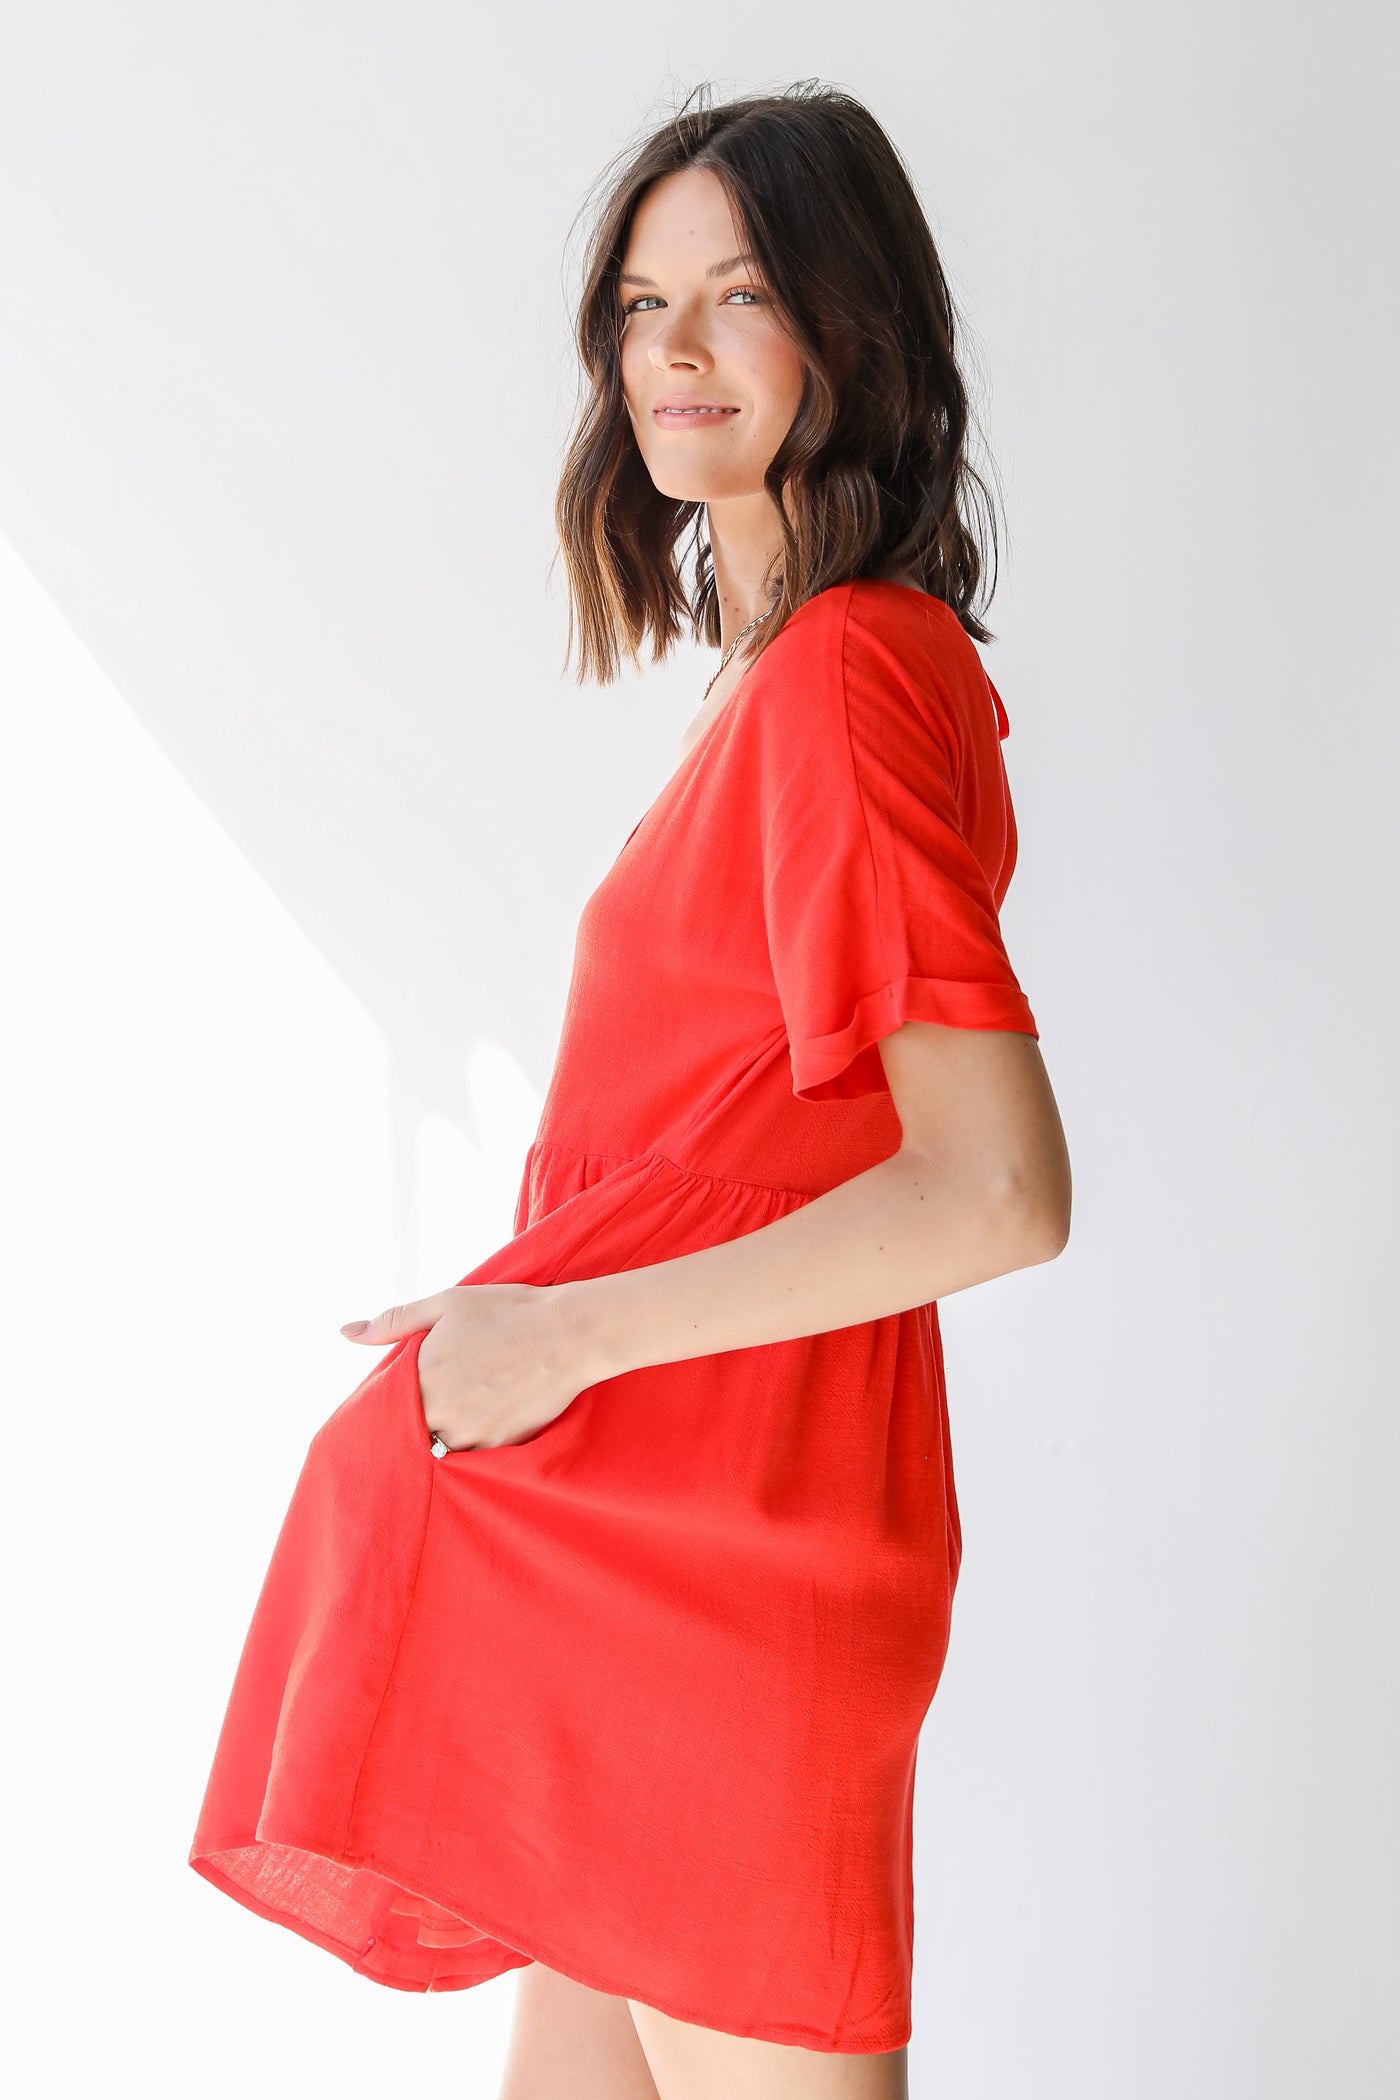 Linen Babydoll Dress in red side view